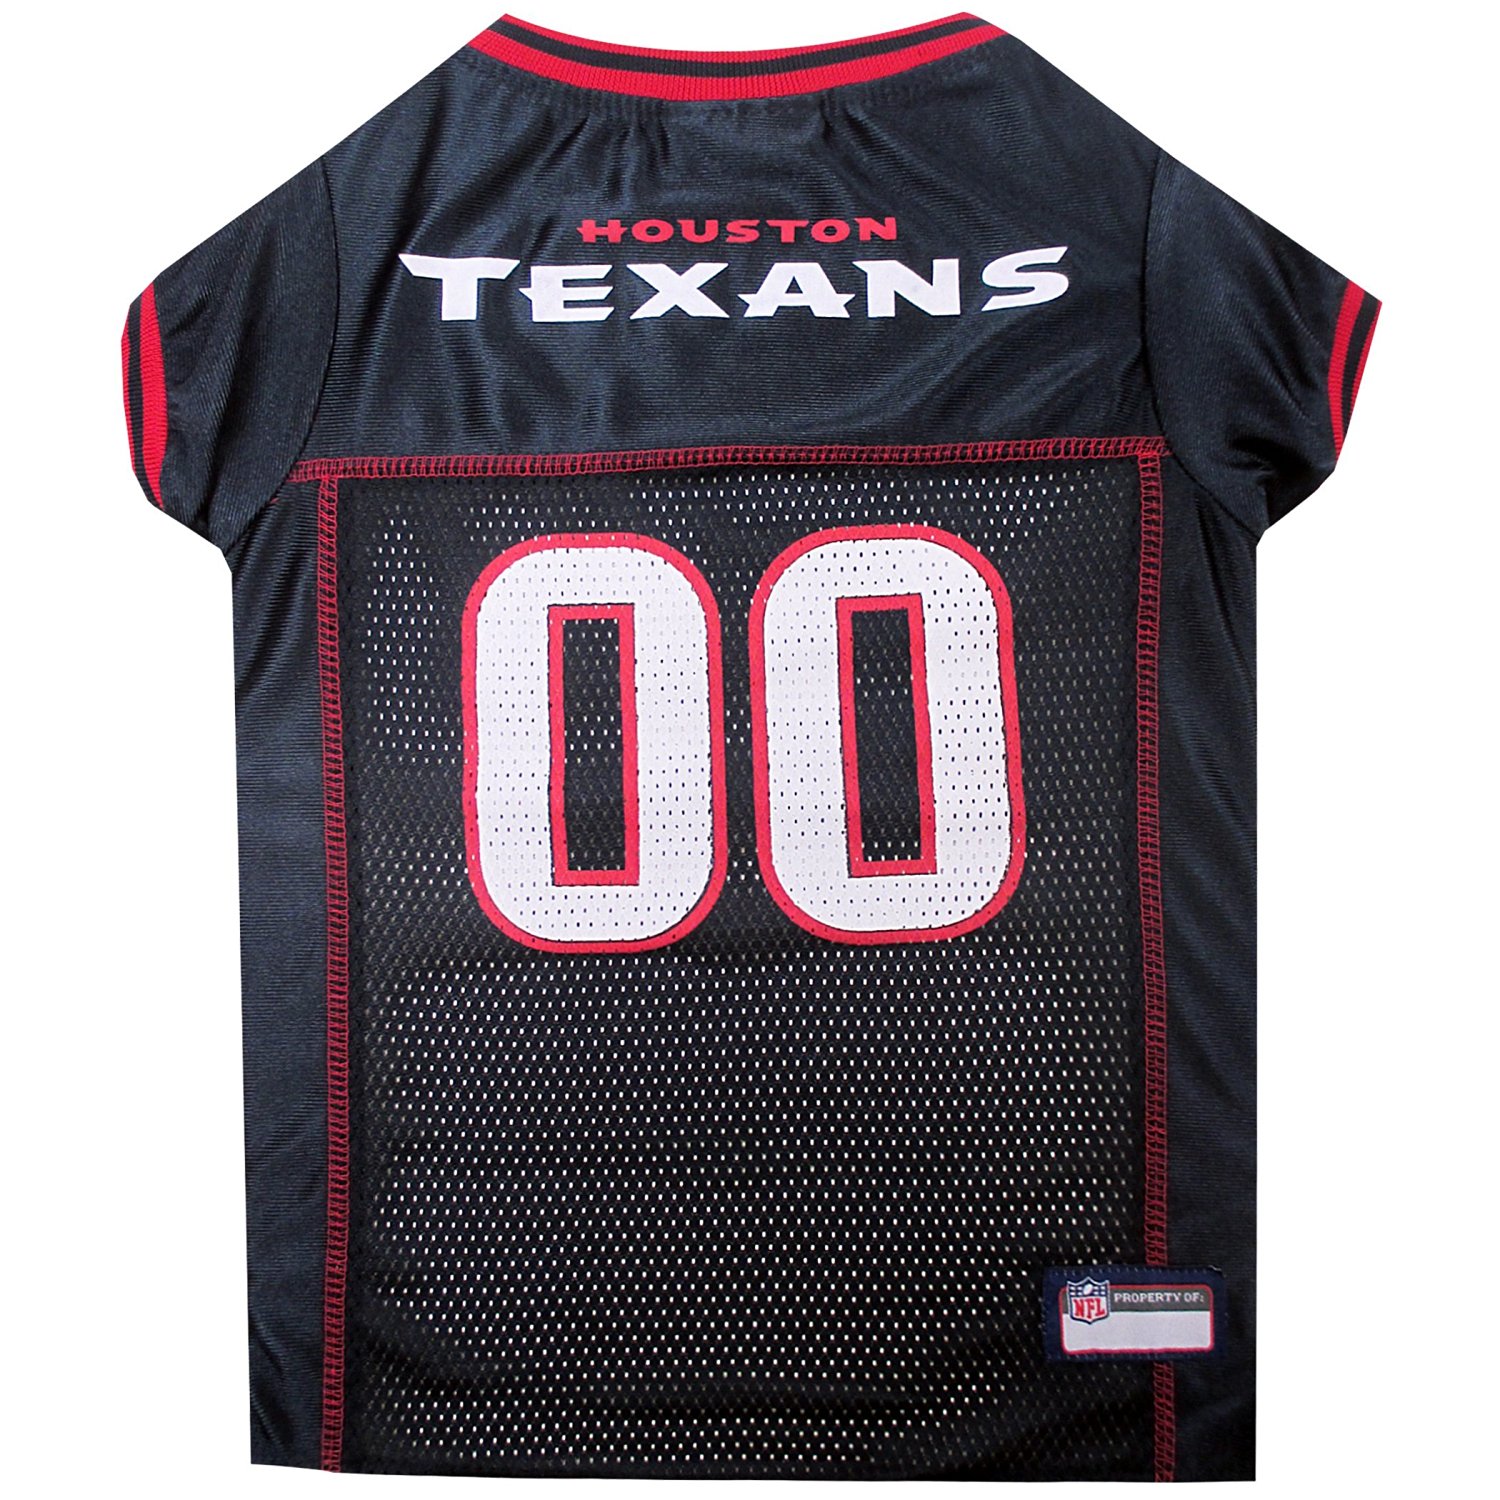 Pets First Co. Houston Texans Pet Jersey